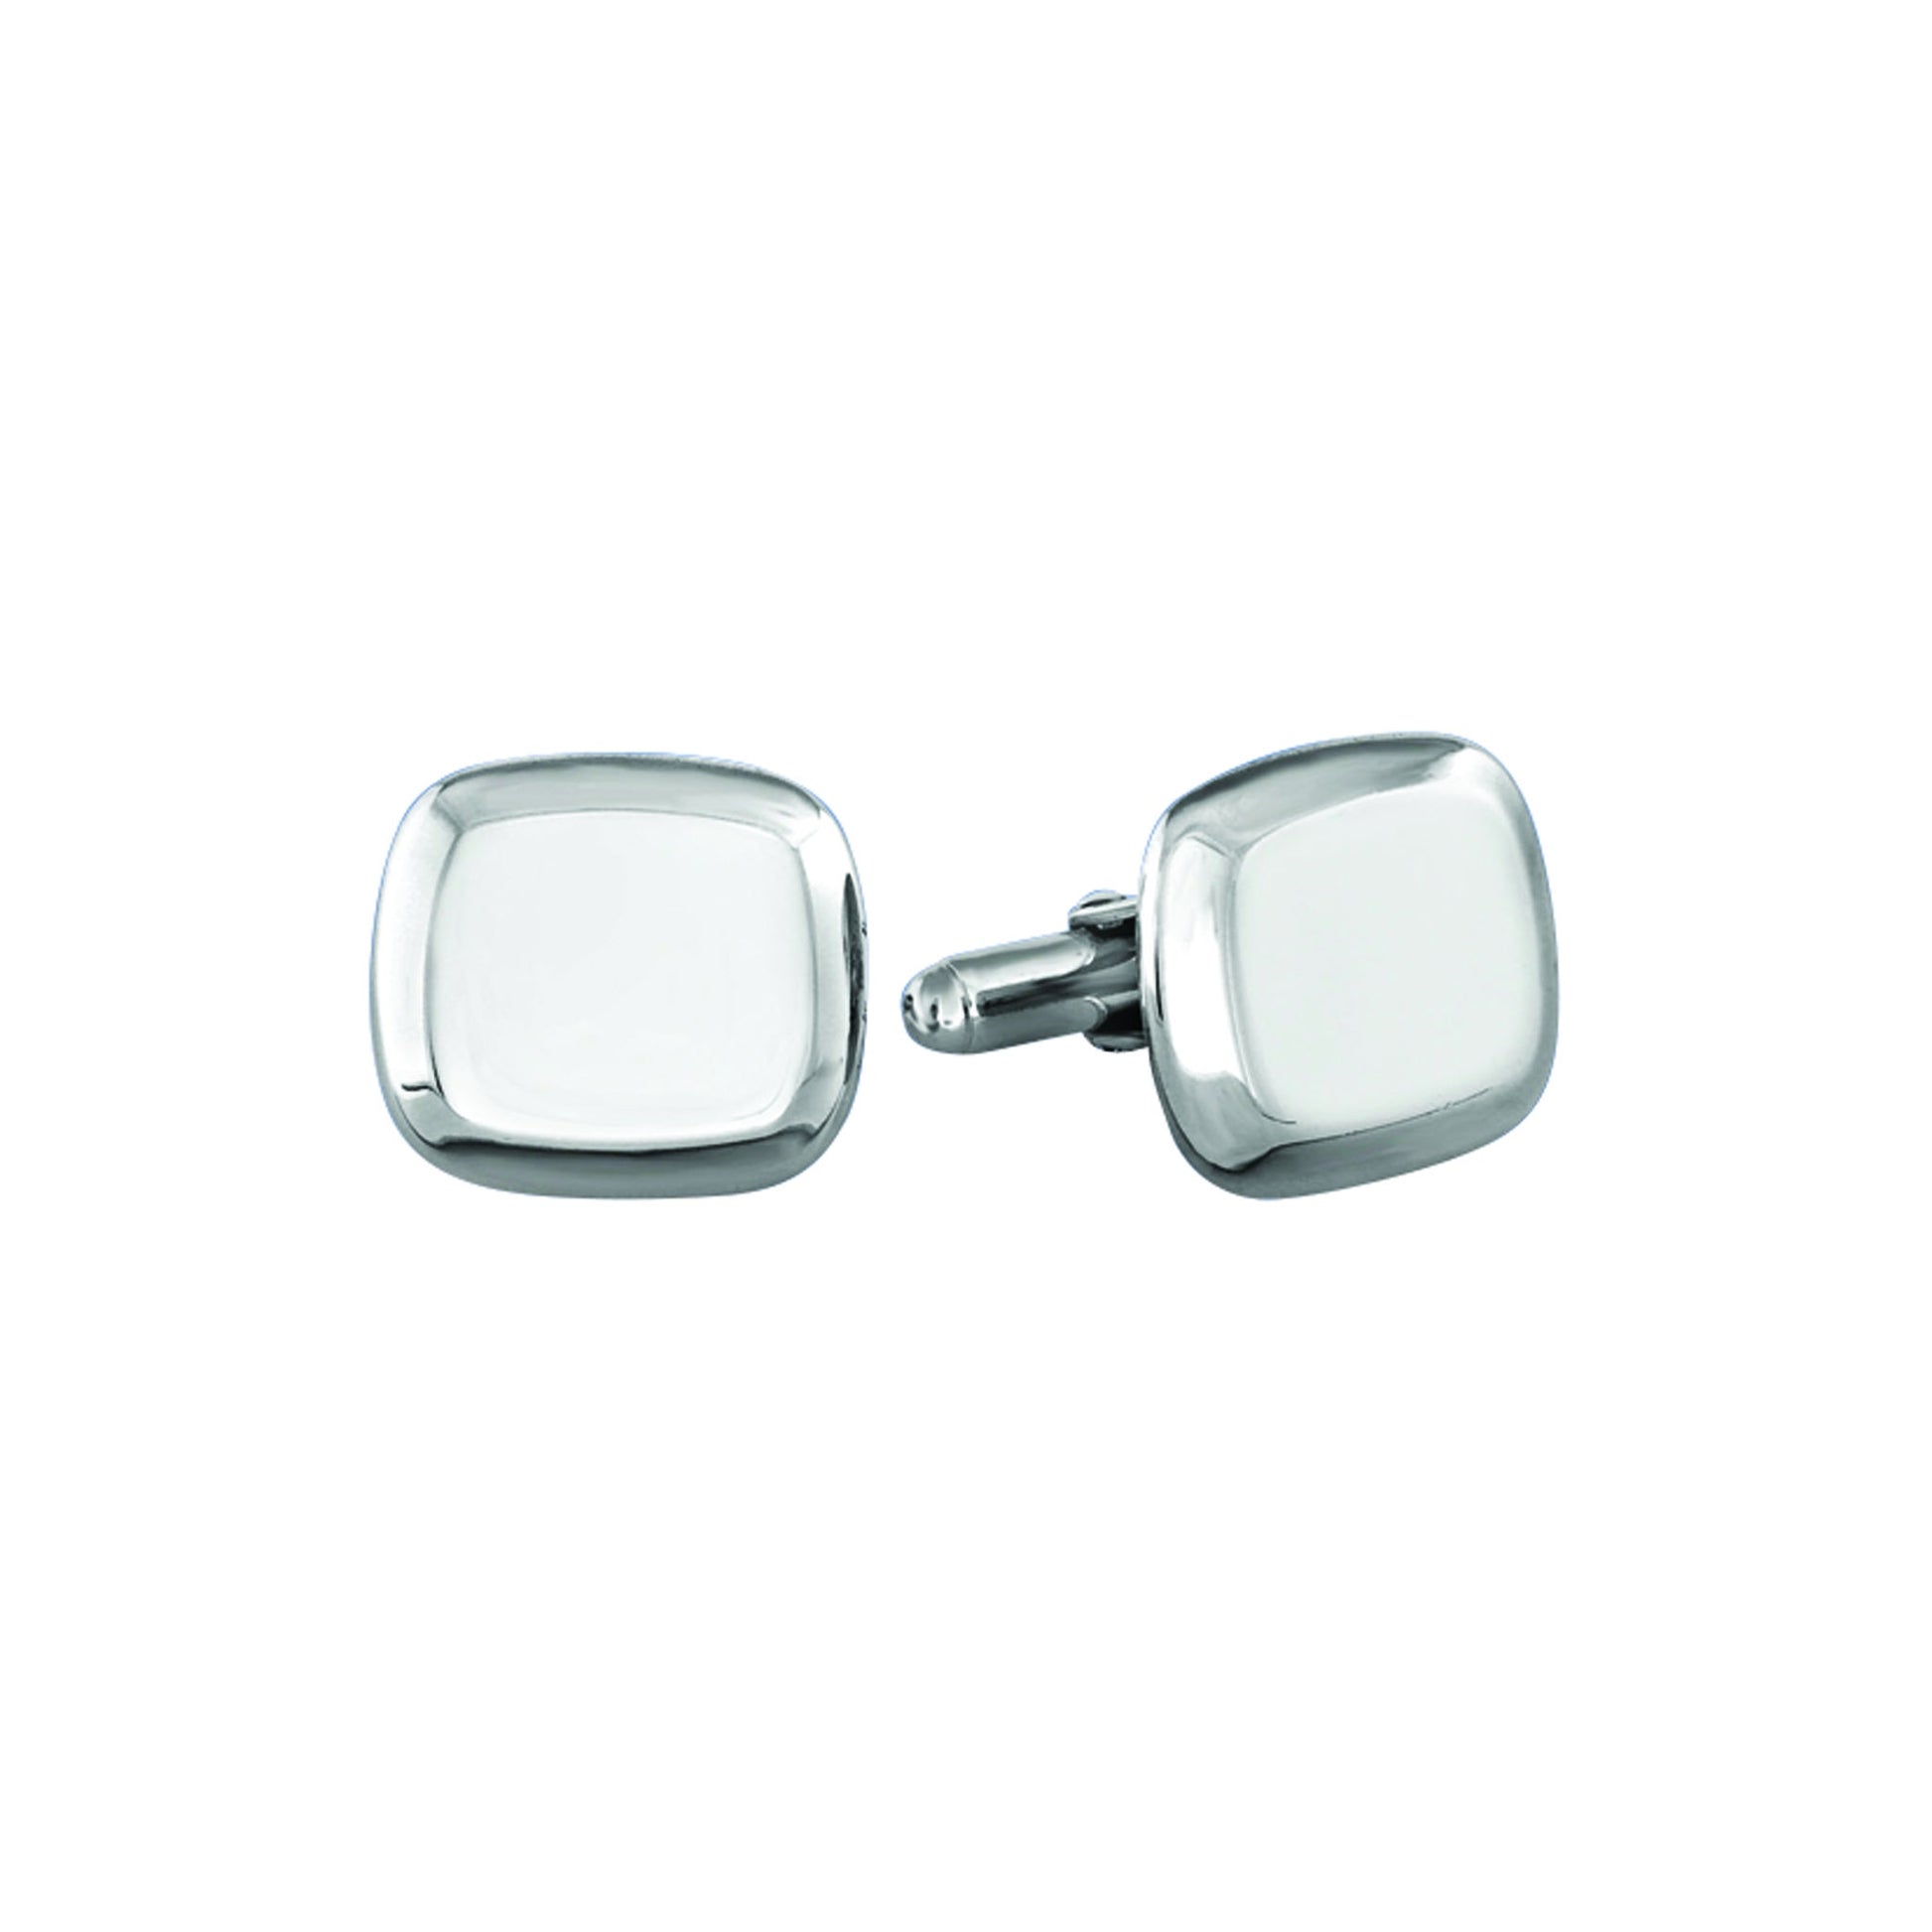 A sterling silver thick bevel edge cushion polished cufflinks displayed on a neutral white background.